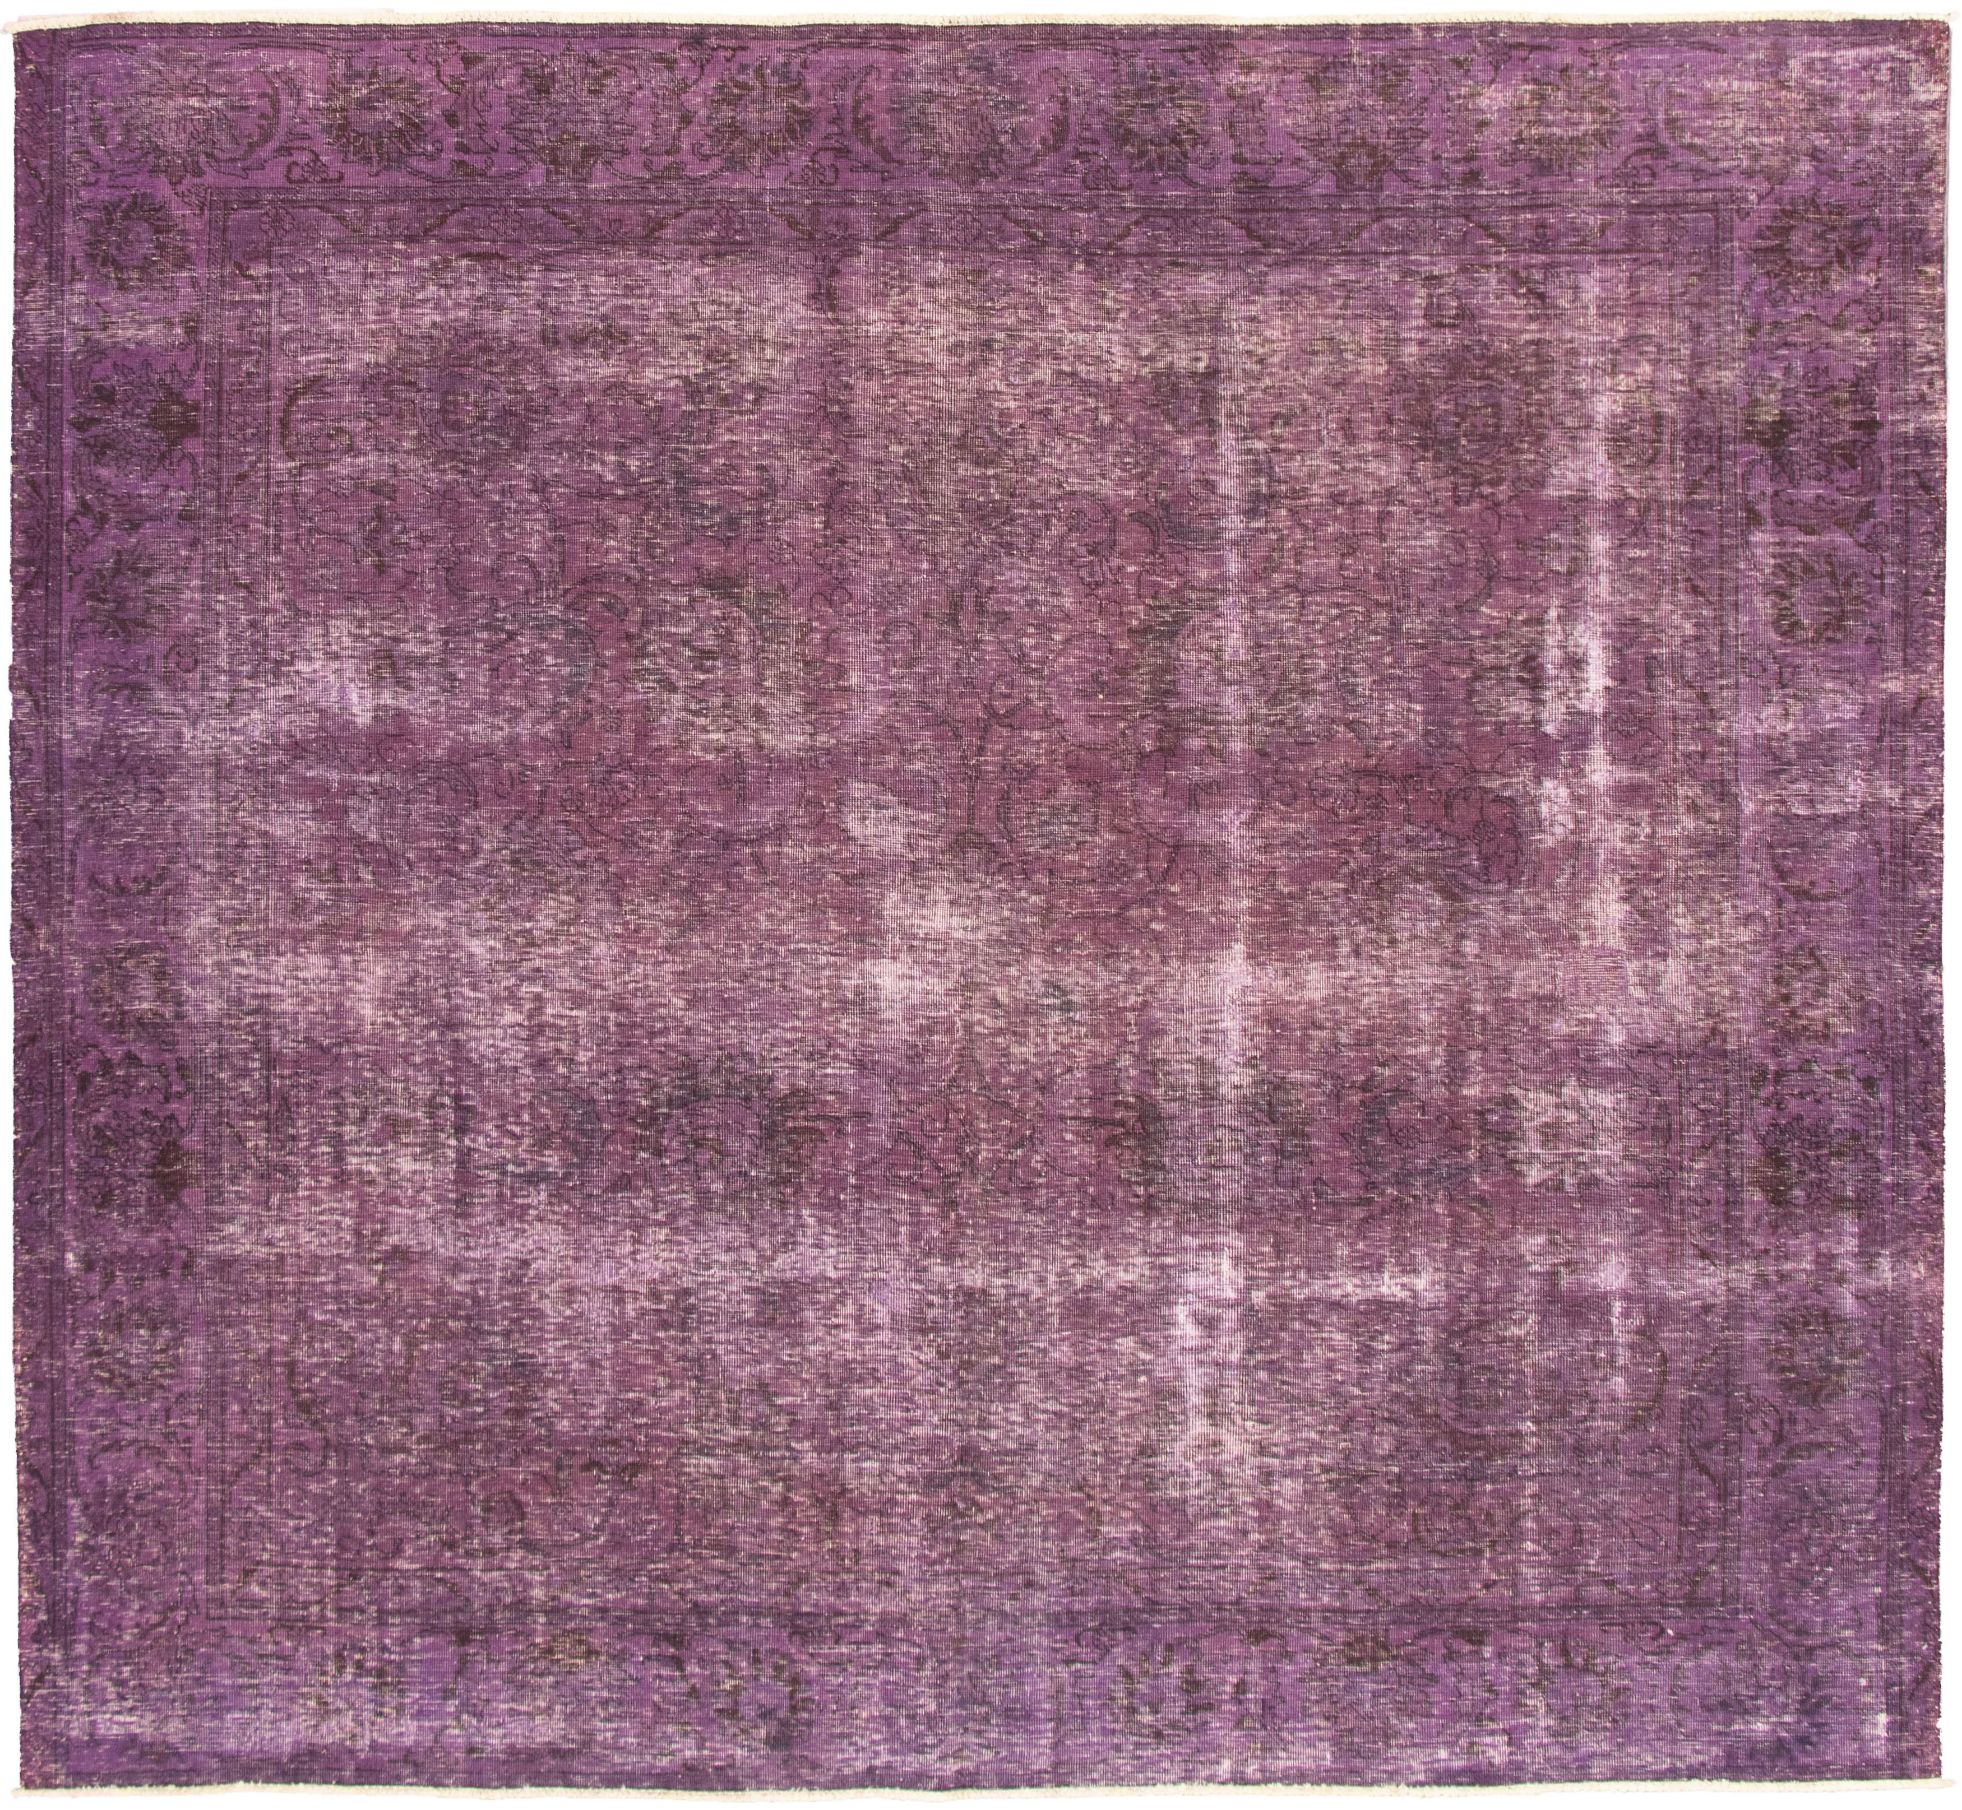 Hand-knotted Color Transition Dark Purple  Wool Rug 9'10" x 8'10" Size: 9'10" x 8'10"  